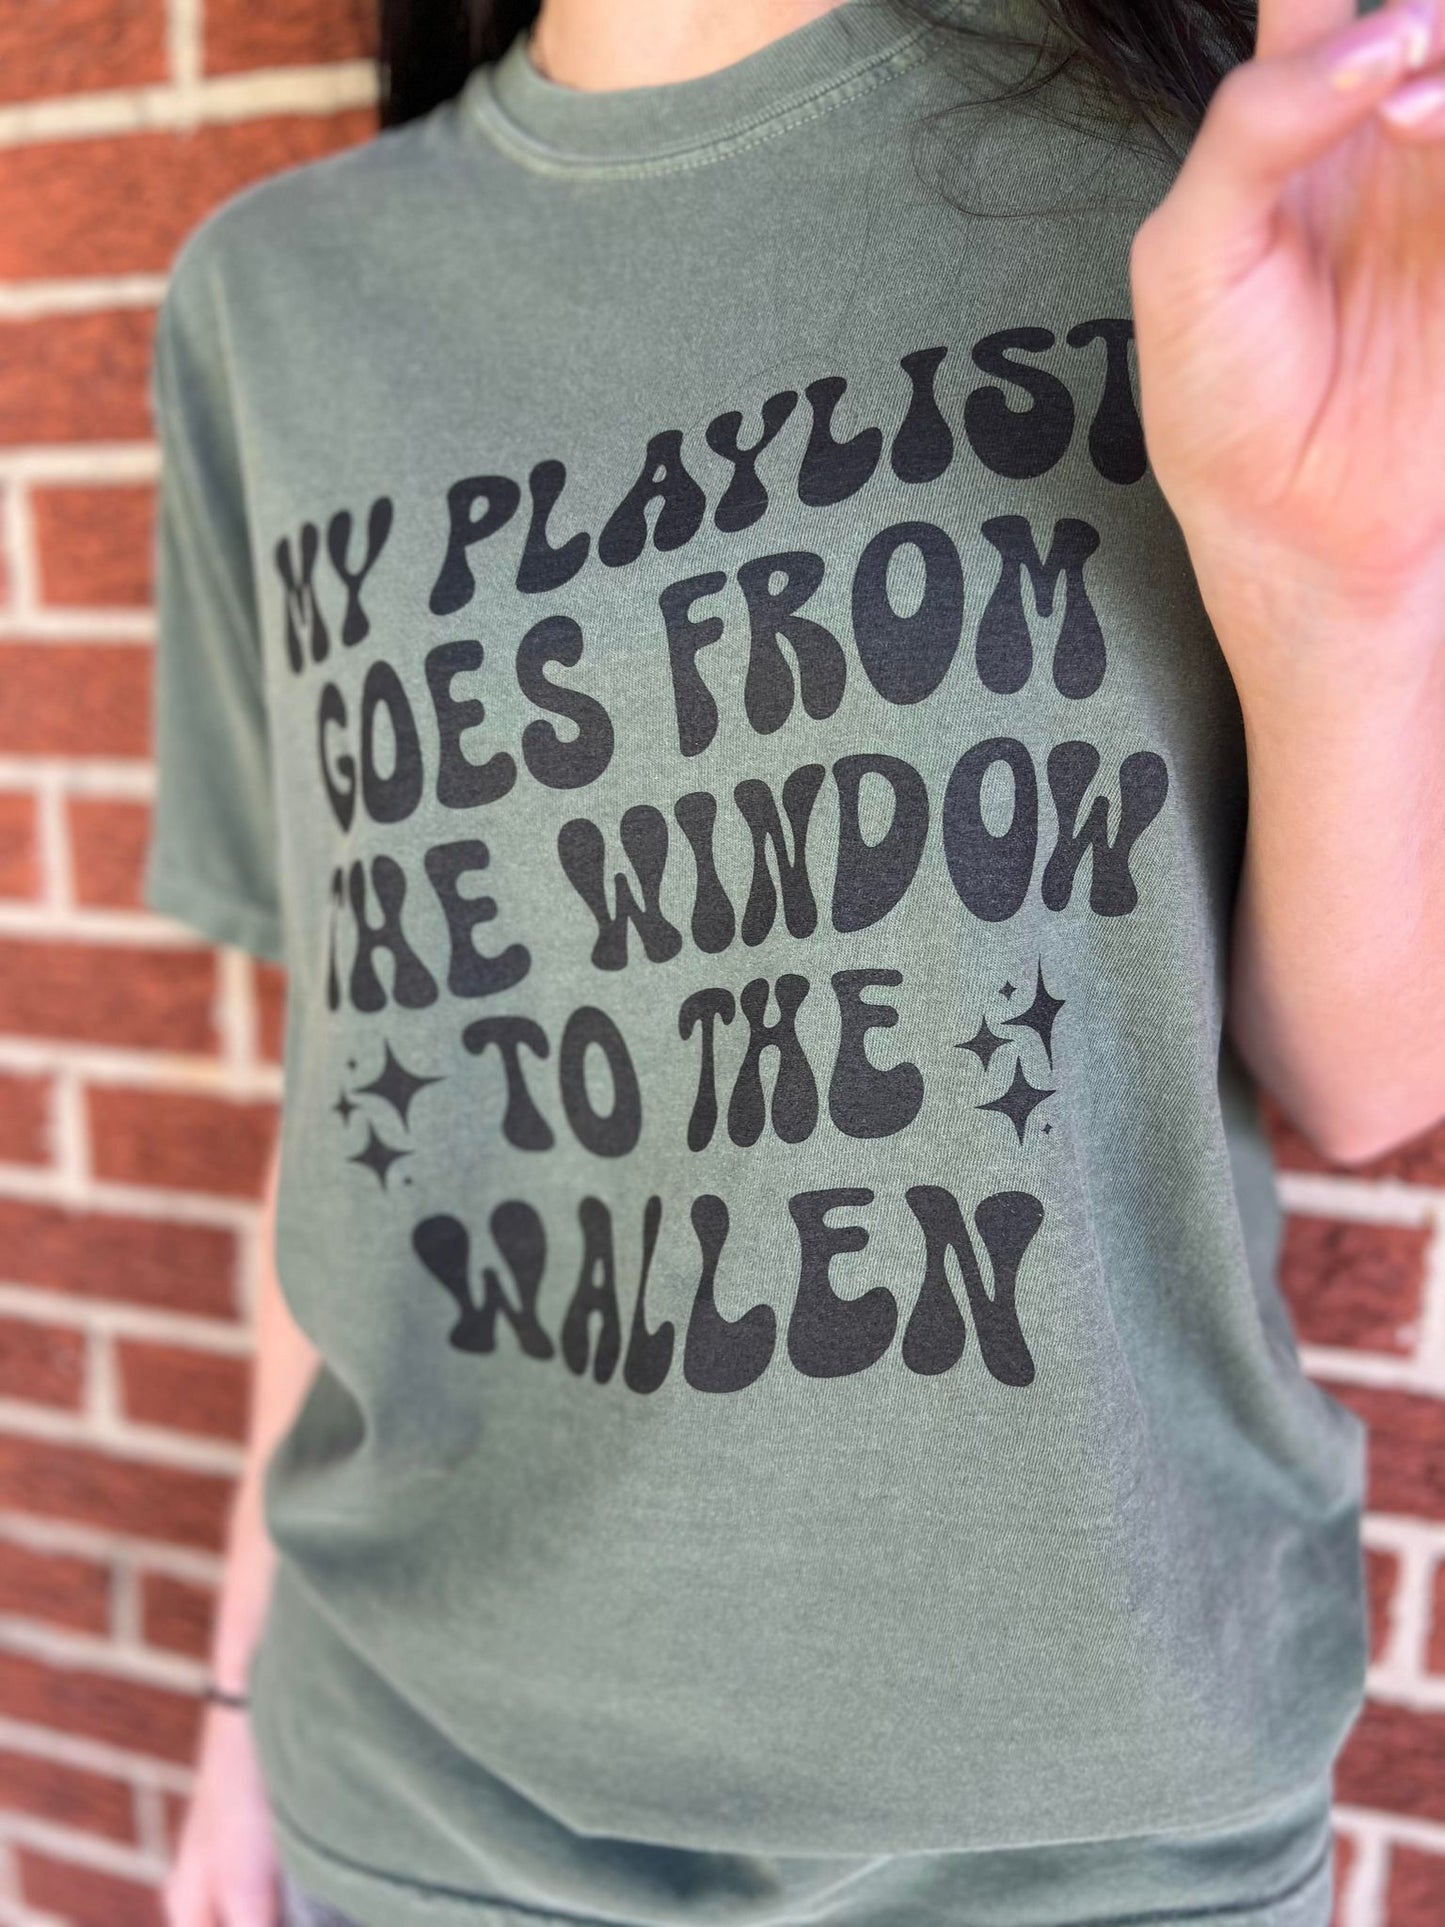 From The Window To The Wallen Tee- ASK Apparel LLC